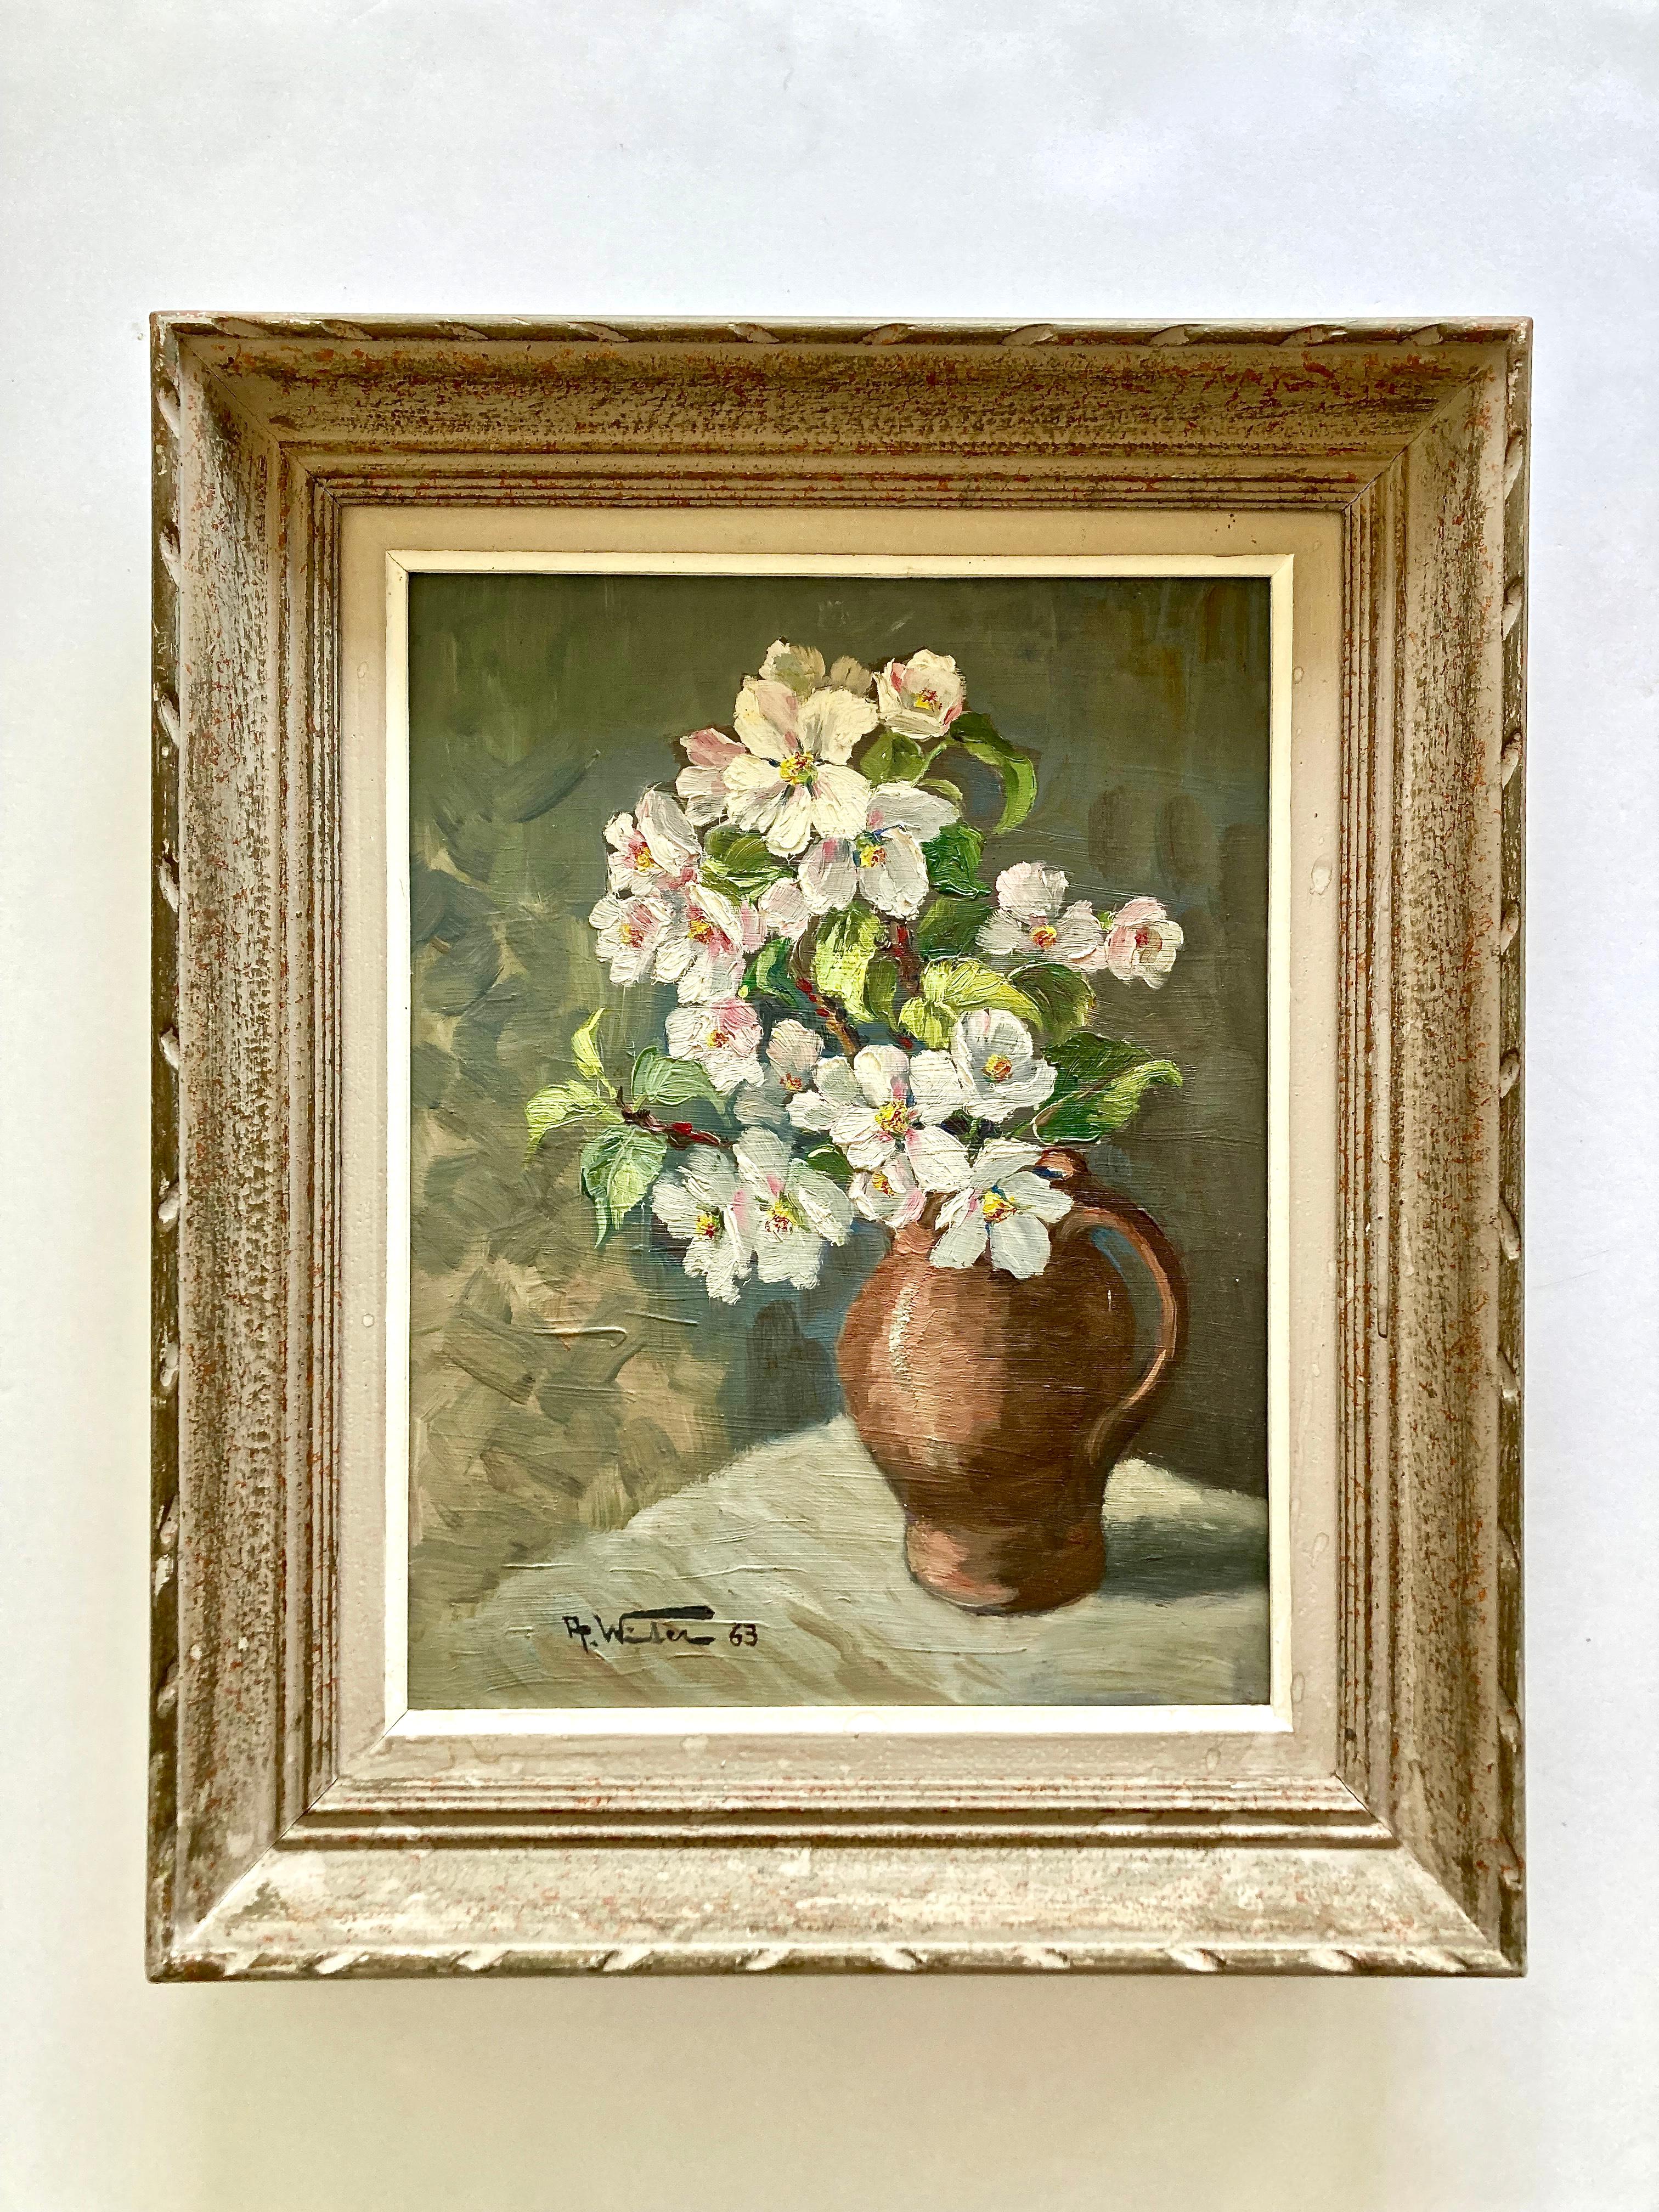 This original, still-life painting in oil on wood-board is painted by the French artist Alfred Winter (1892-1967) . A. Winter lived and worked in the Alsace region in the north-east of France, close to the German and Swiss borders. He is mostly